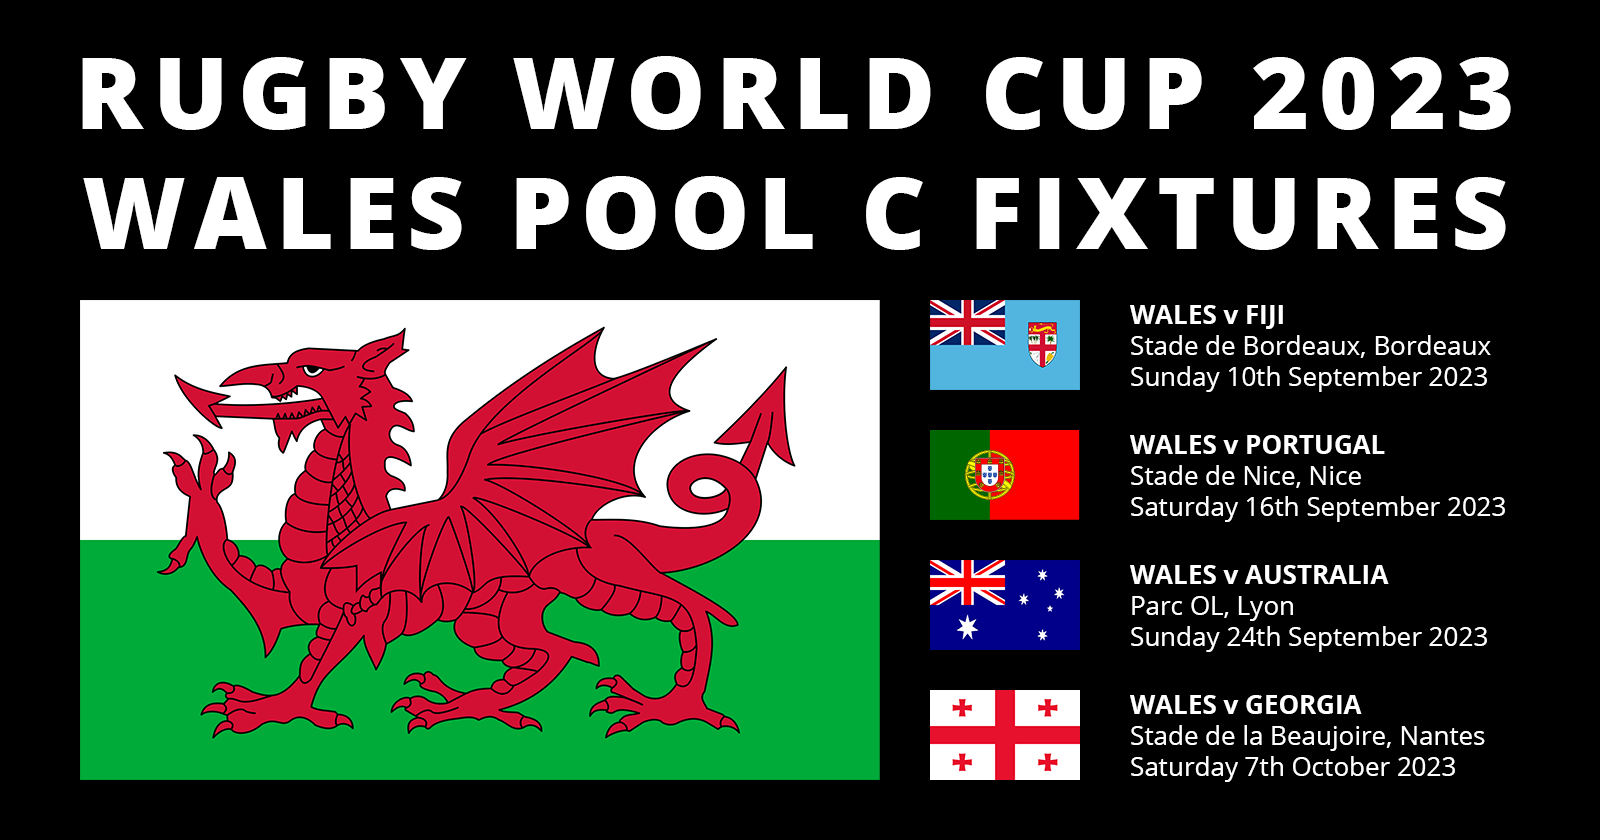 Wales Rugby World Cup 2023 Fixtures